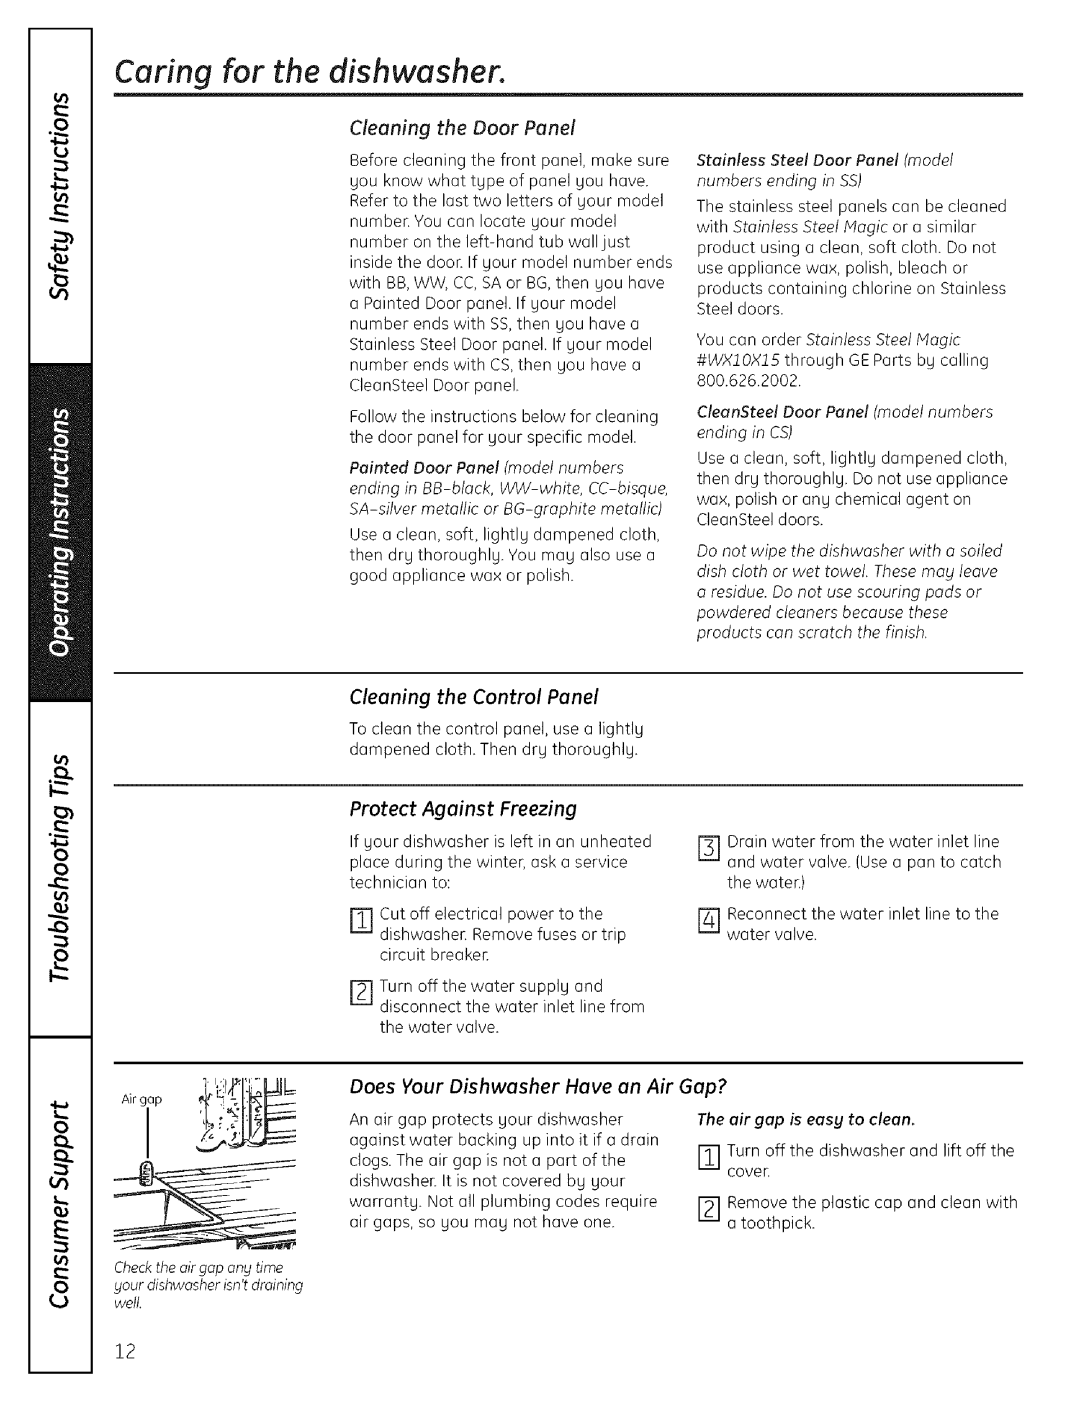 GE EDWSO00 manual Caring for the dishwasher 